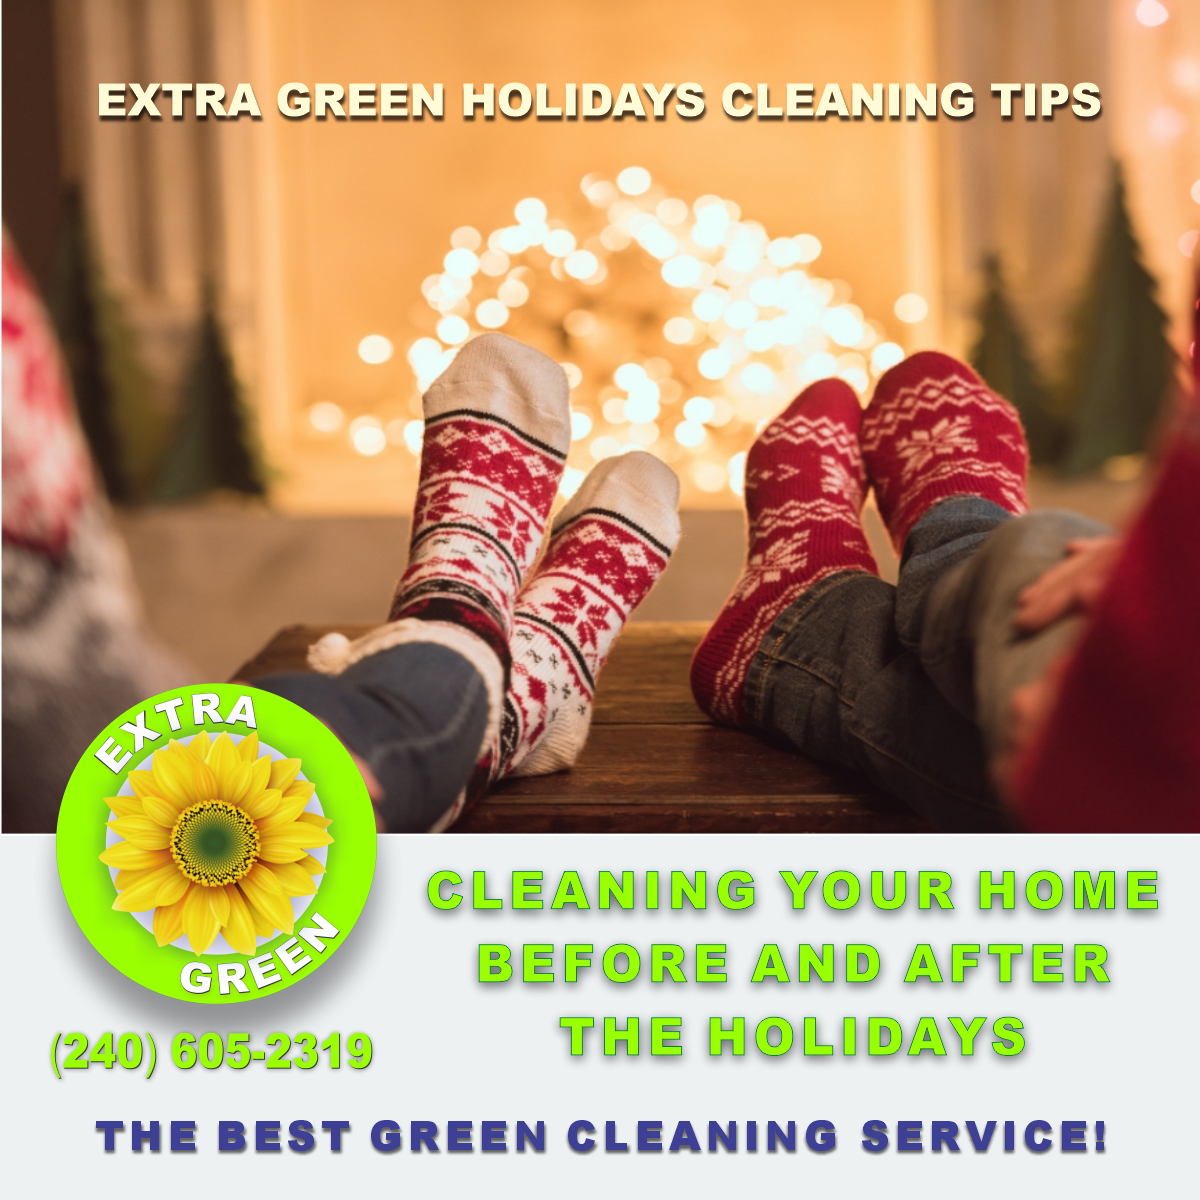 Post-Holiday Cleaning Tips to Make Your Home Spotless Again